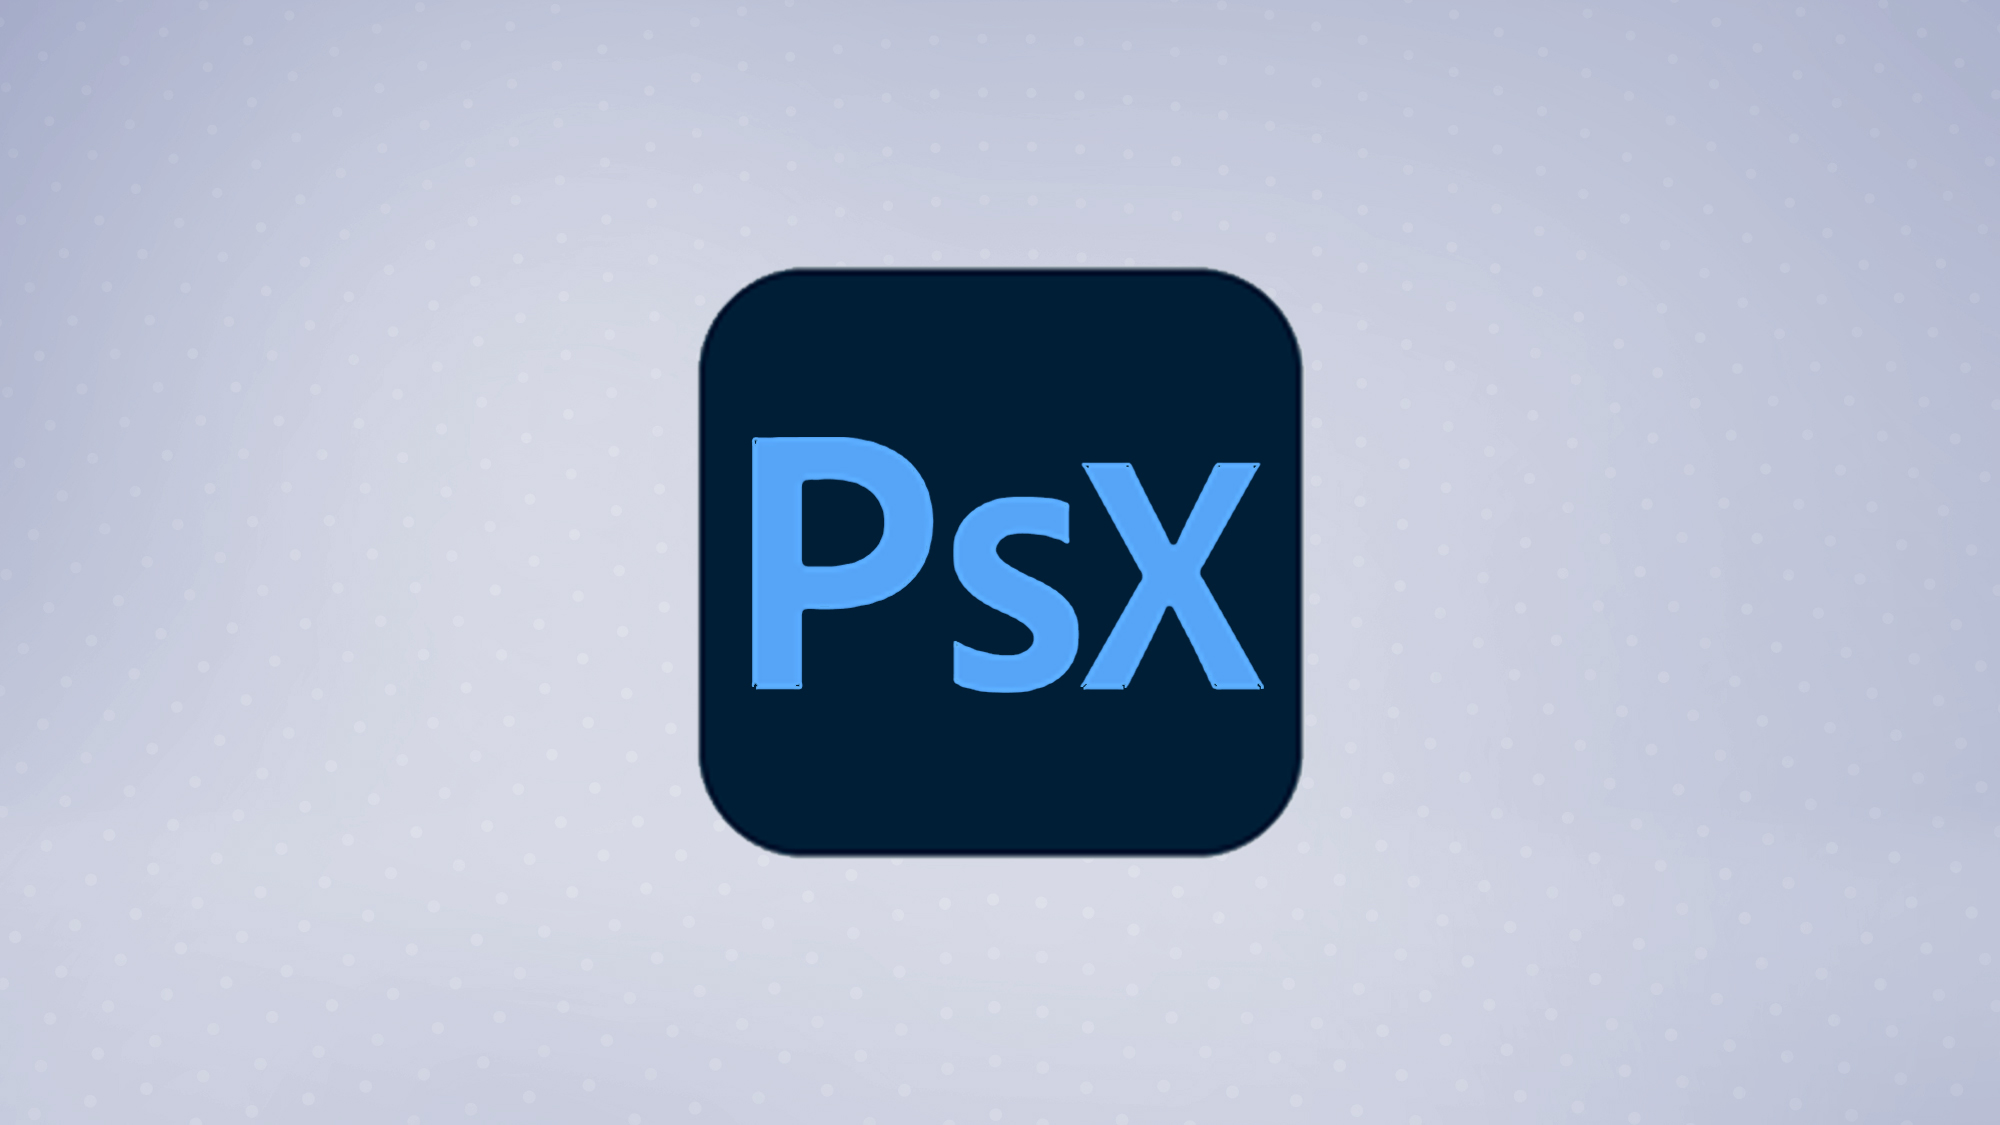 How to download Adobe Photoshop Express | Tom's Guide